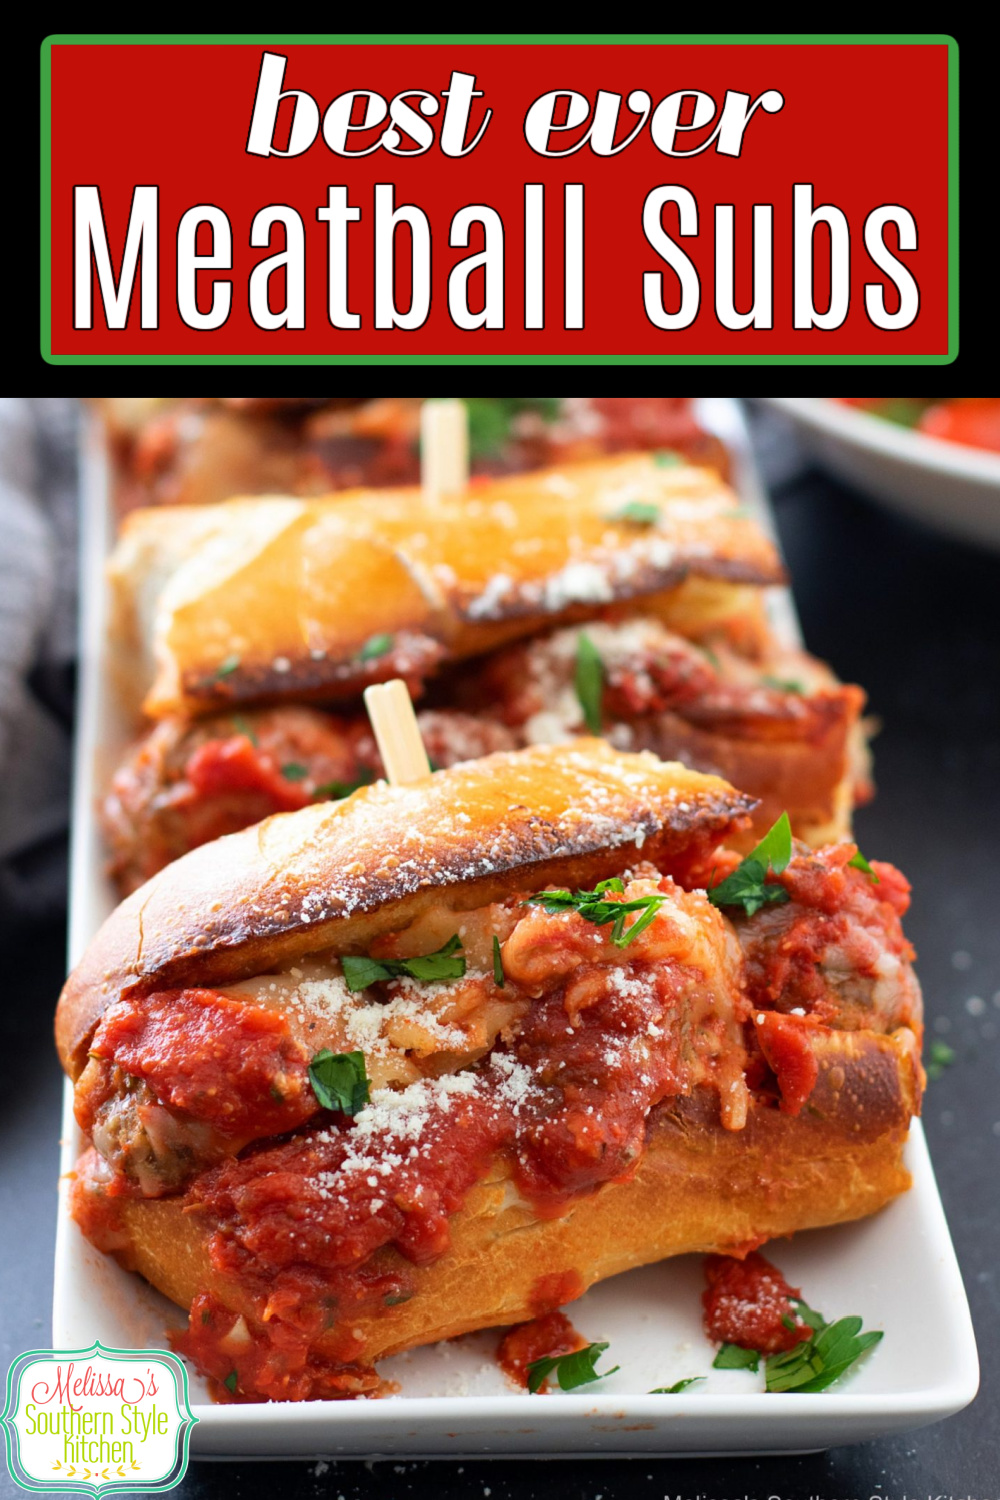 These Meatball Subs are ideal for casual meals and game day snacking #meatballsubs #meatballs #Italiansubs #easygroundbeefrecipes #dinner #snackrecipes #subs #frenchbread #southernrecipes via @melissasssk